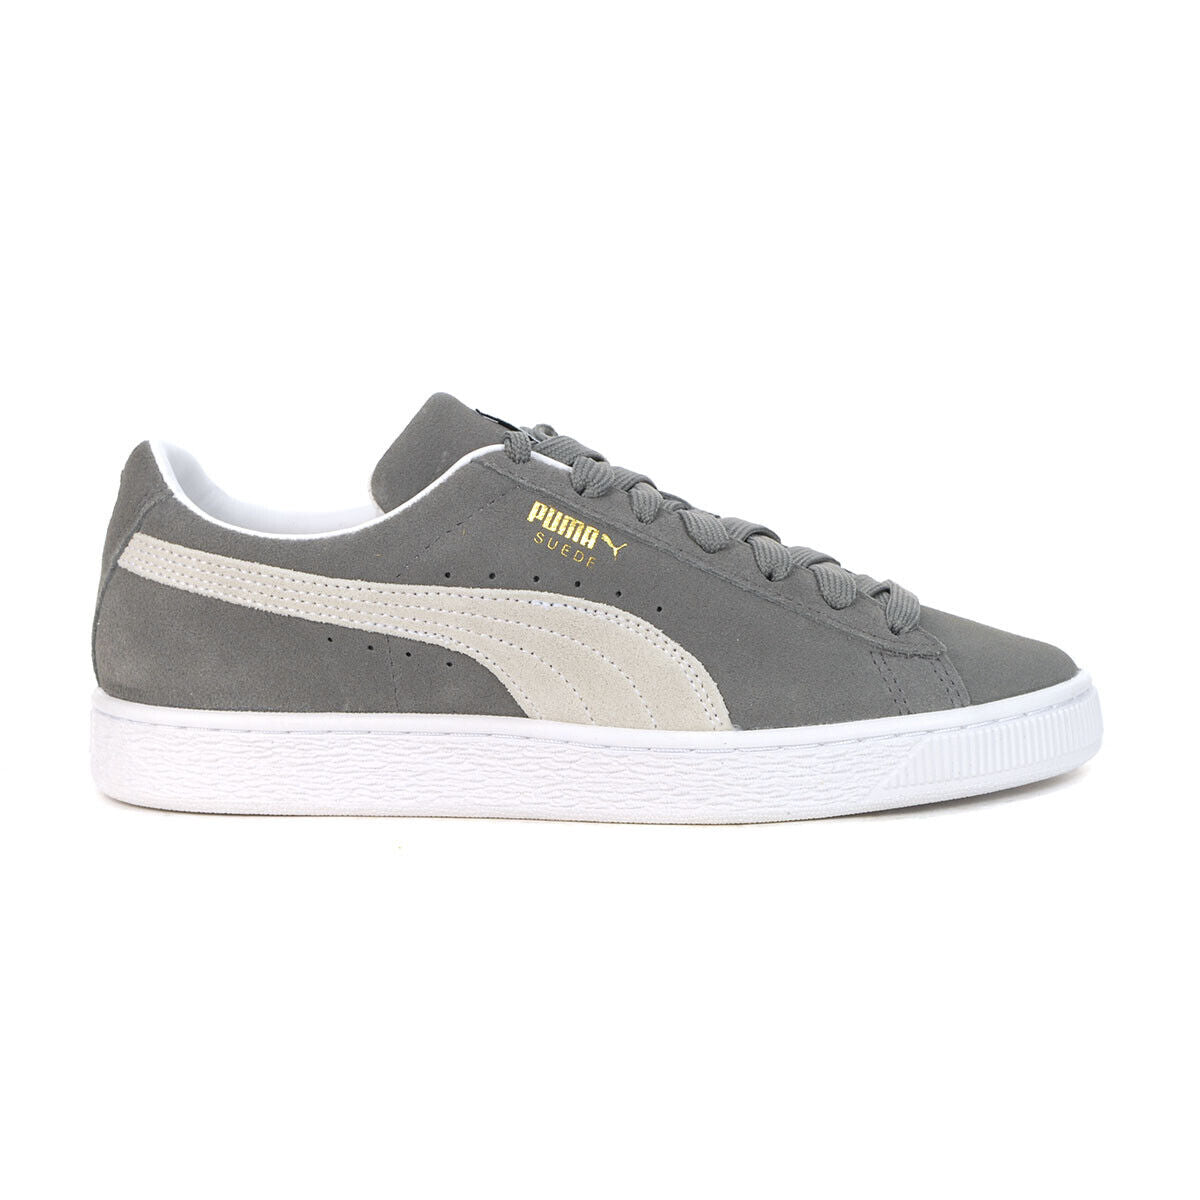 Be apart of the history of Suede men's shoe from Puma